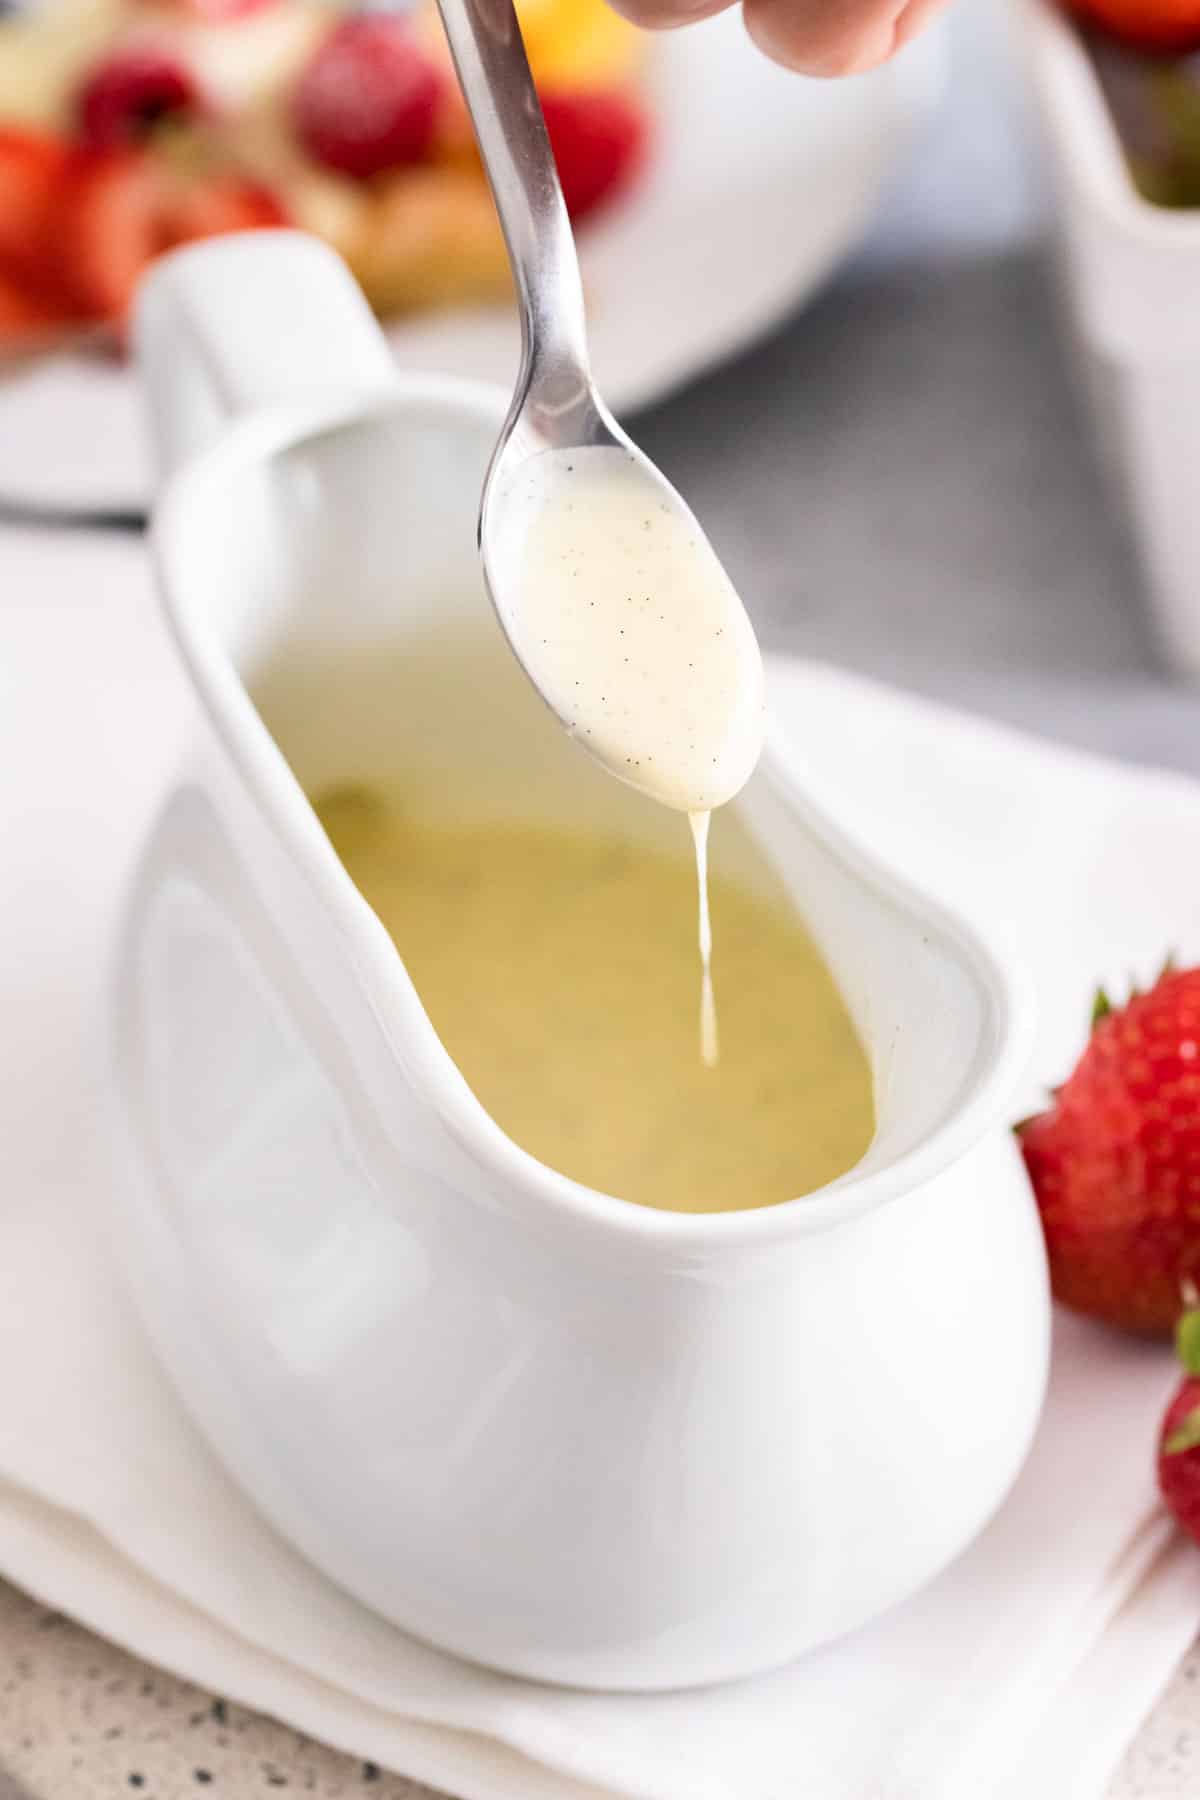 Vanilla sauce dripping from a spoon into a bowl.